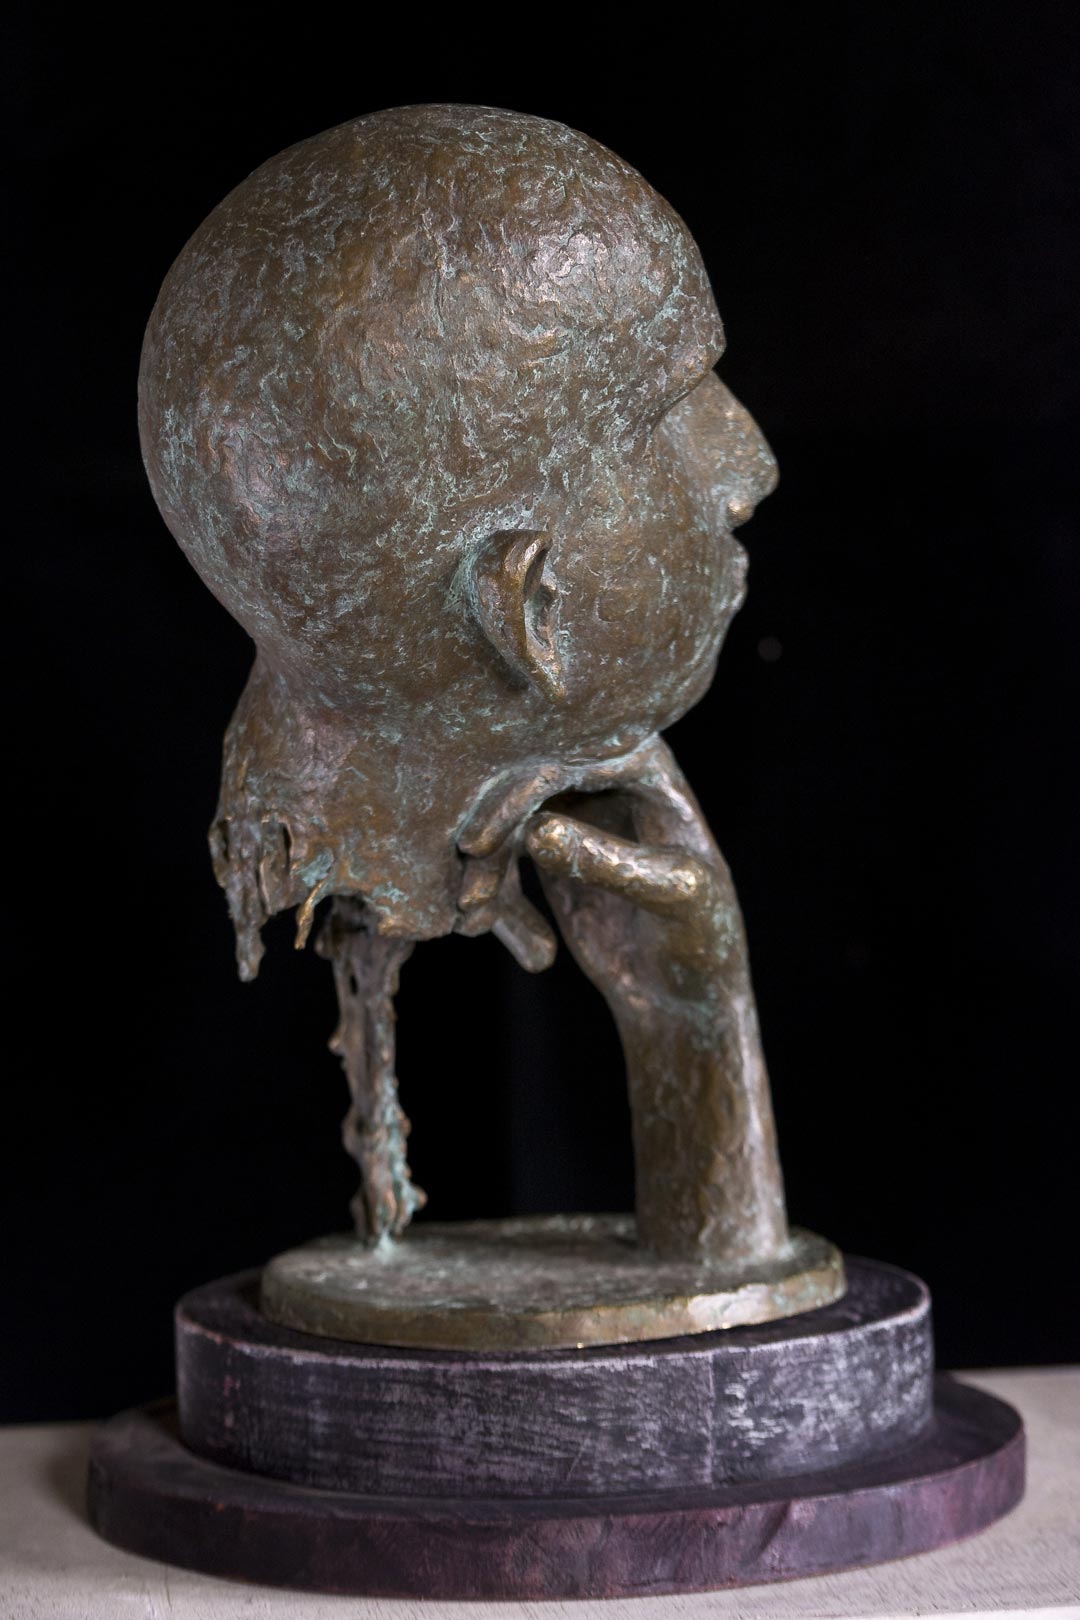 Figurative Sculpture with Bronze"Melting of Thoughts" art by Prabir Roy